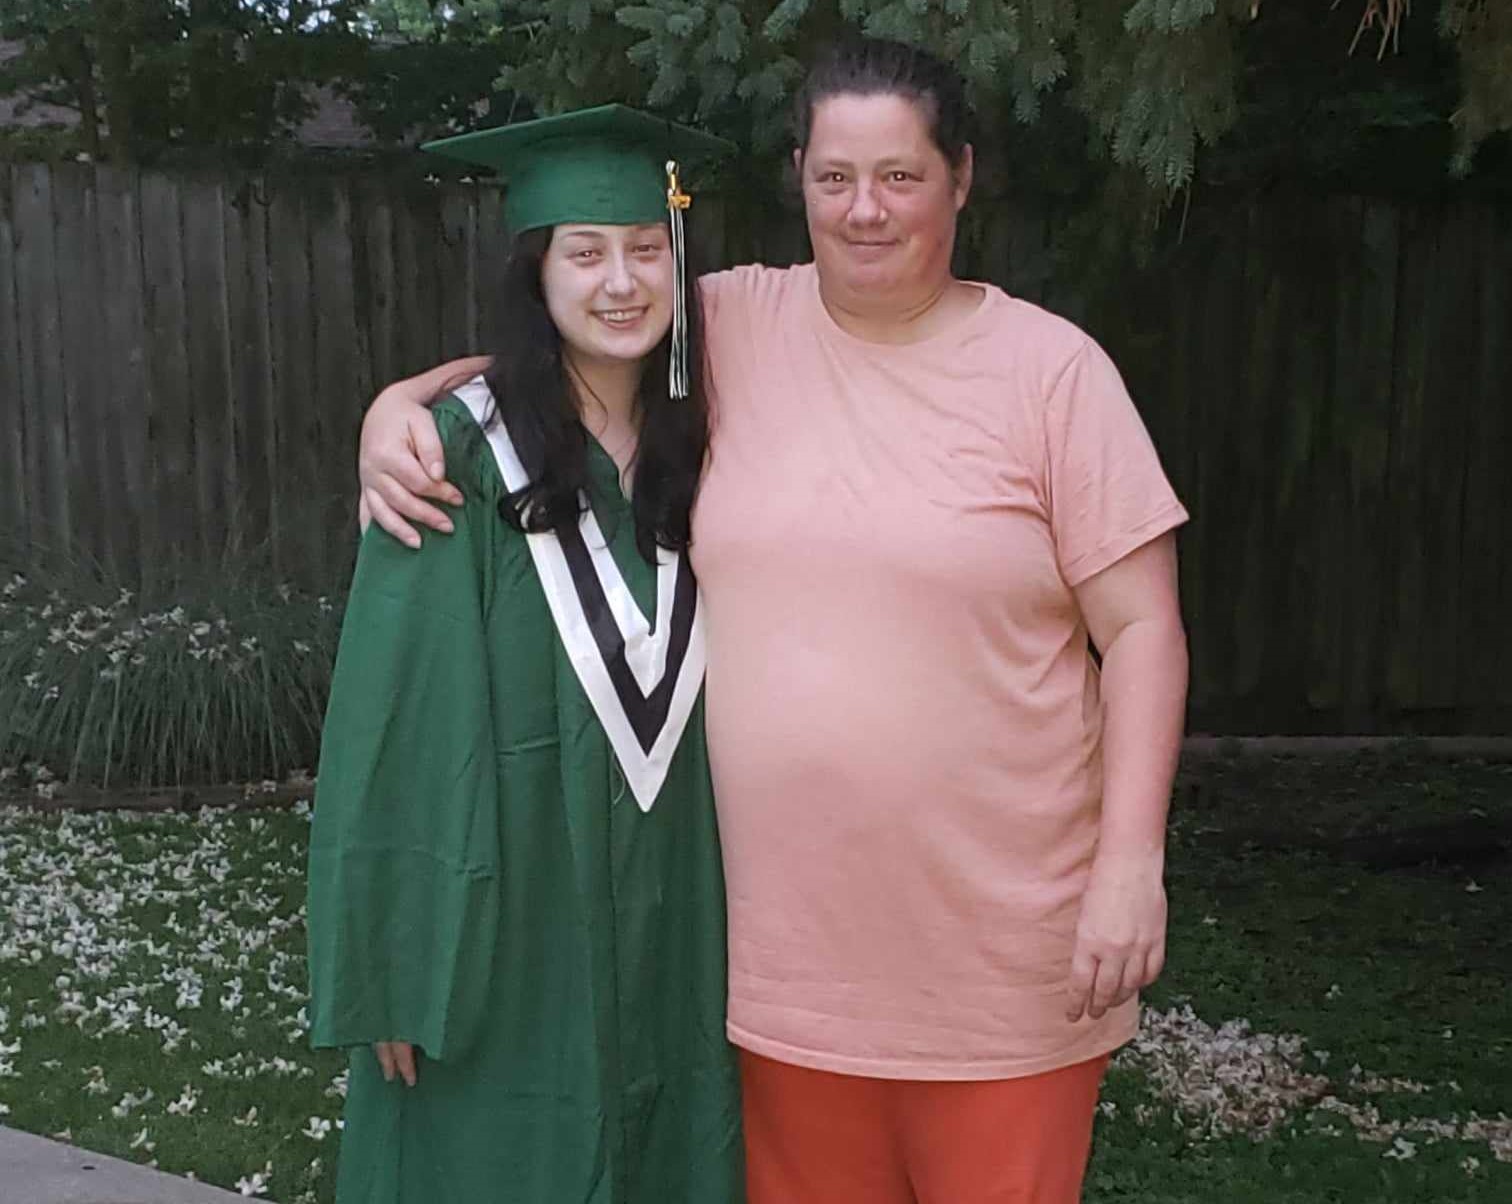 Alexis and Amanda stand in a garden, with Amanda's arm wrapped around Alexis's shoulders. Alexis wears a green graduation gown and cap.